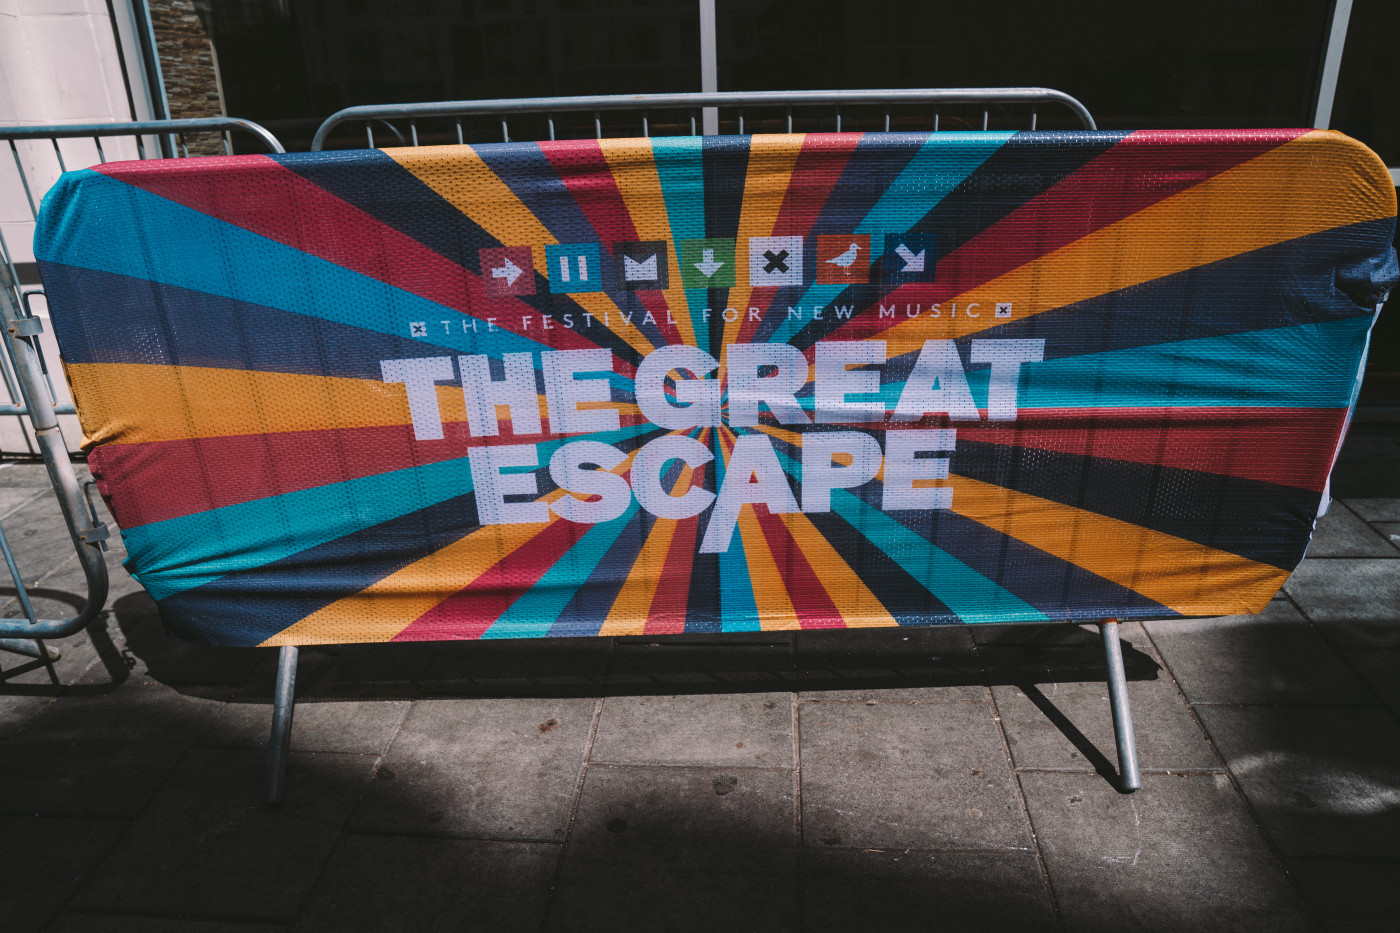 In Pictures: The Great Escape 2022 - Day 1